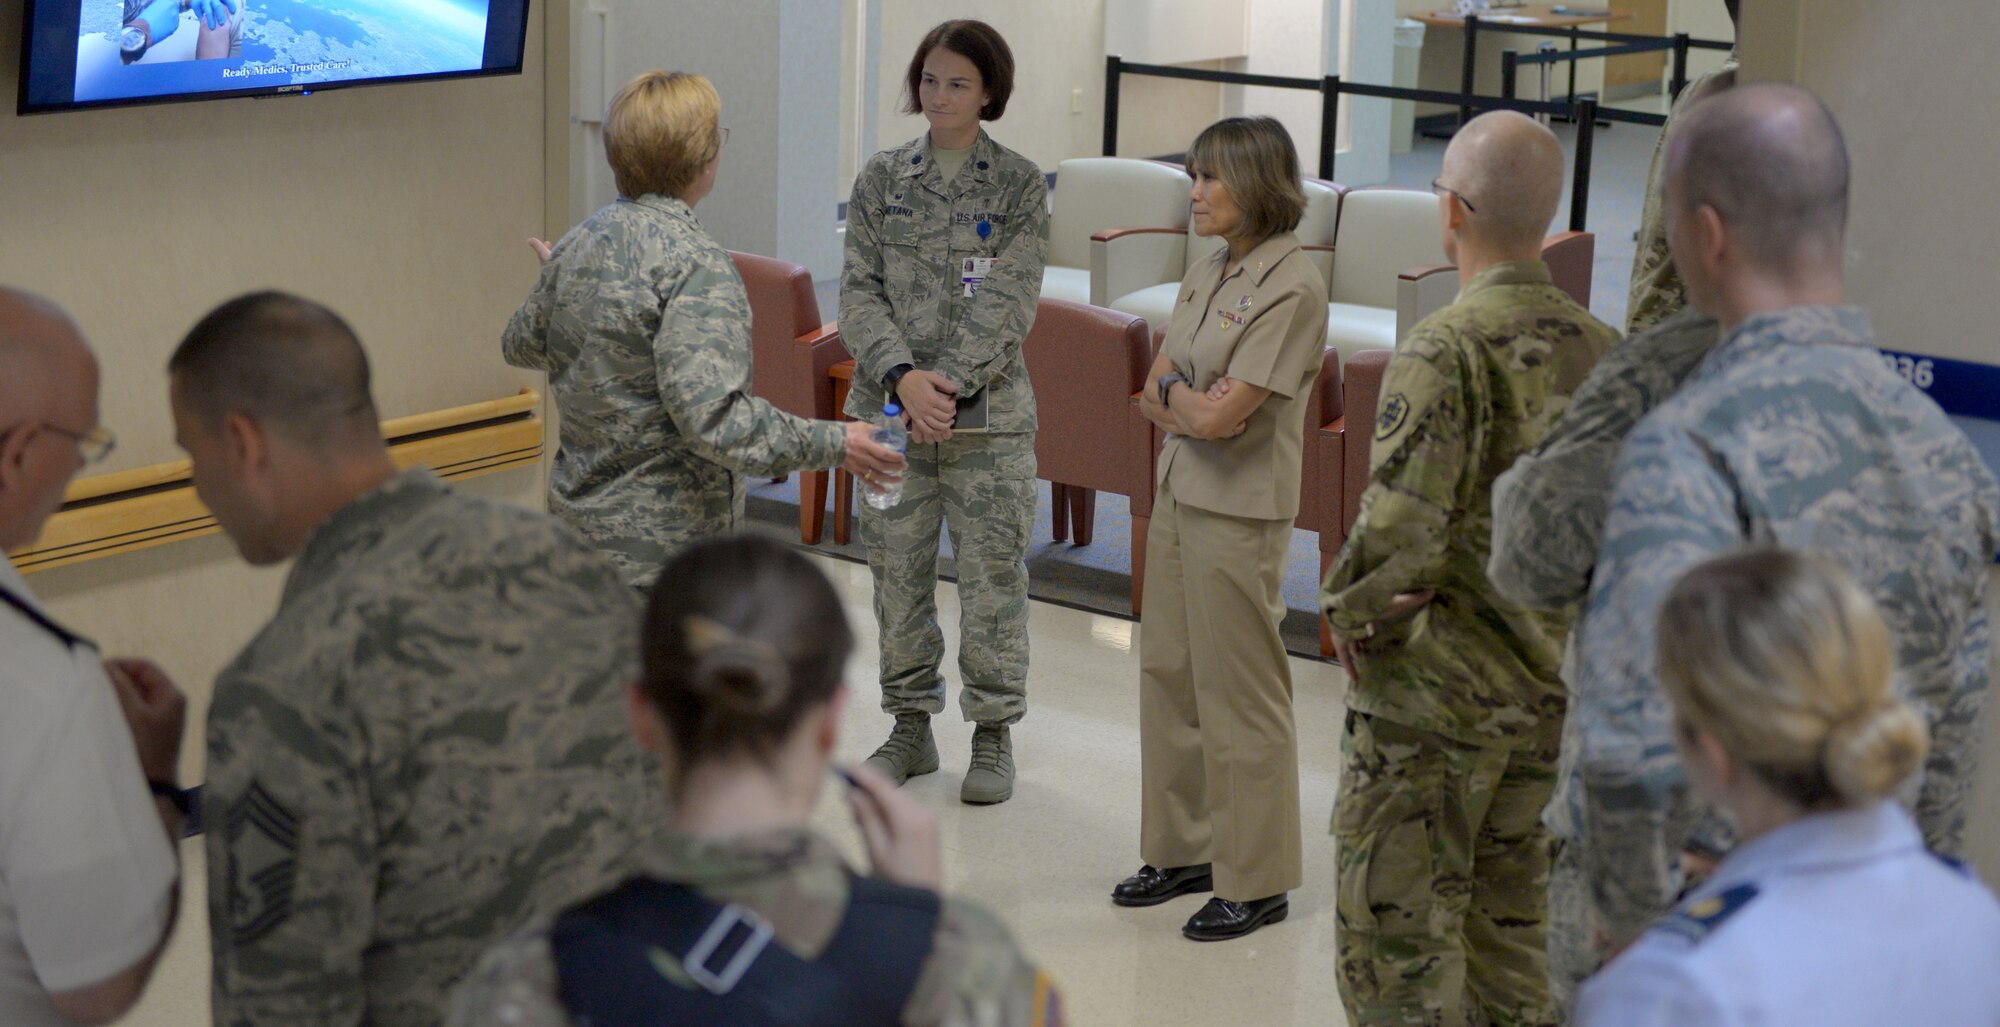 Members of the Defense Health Agency and Lt. Gen. Dorothy Hogg, U.S. Air Force surgeon general, take a tour of the 628th Medical Group facility during their July 30, 2018, visit to Joint Base Charleston. The visit allowed the group to develop a better understanding of the medical services provided by the 628th MDG as it transitions to fall under DHA management.